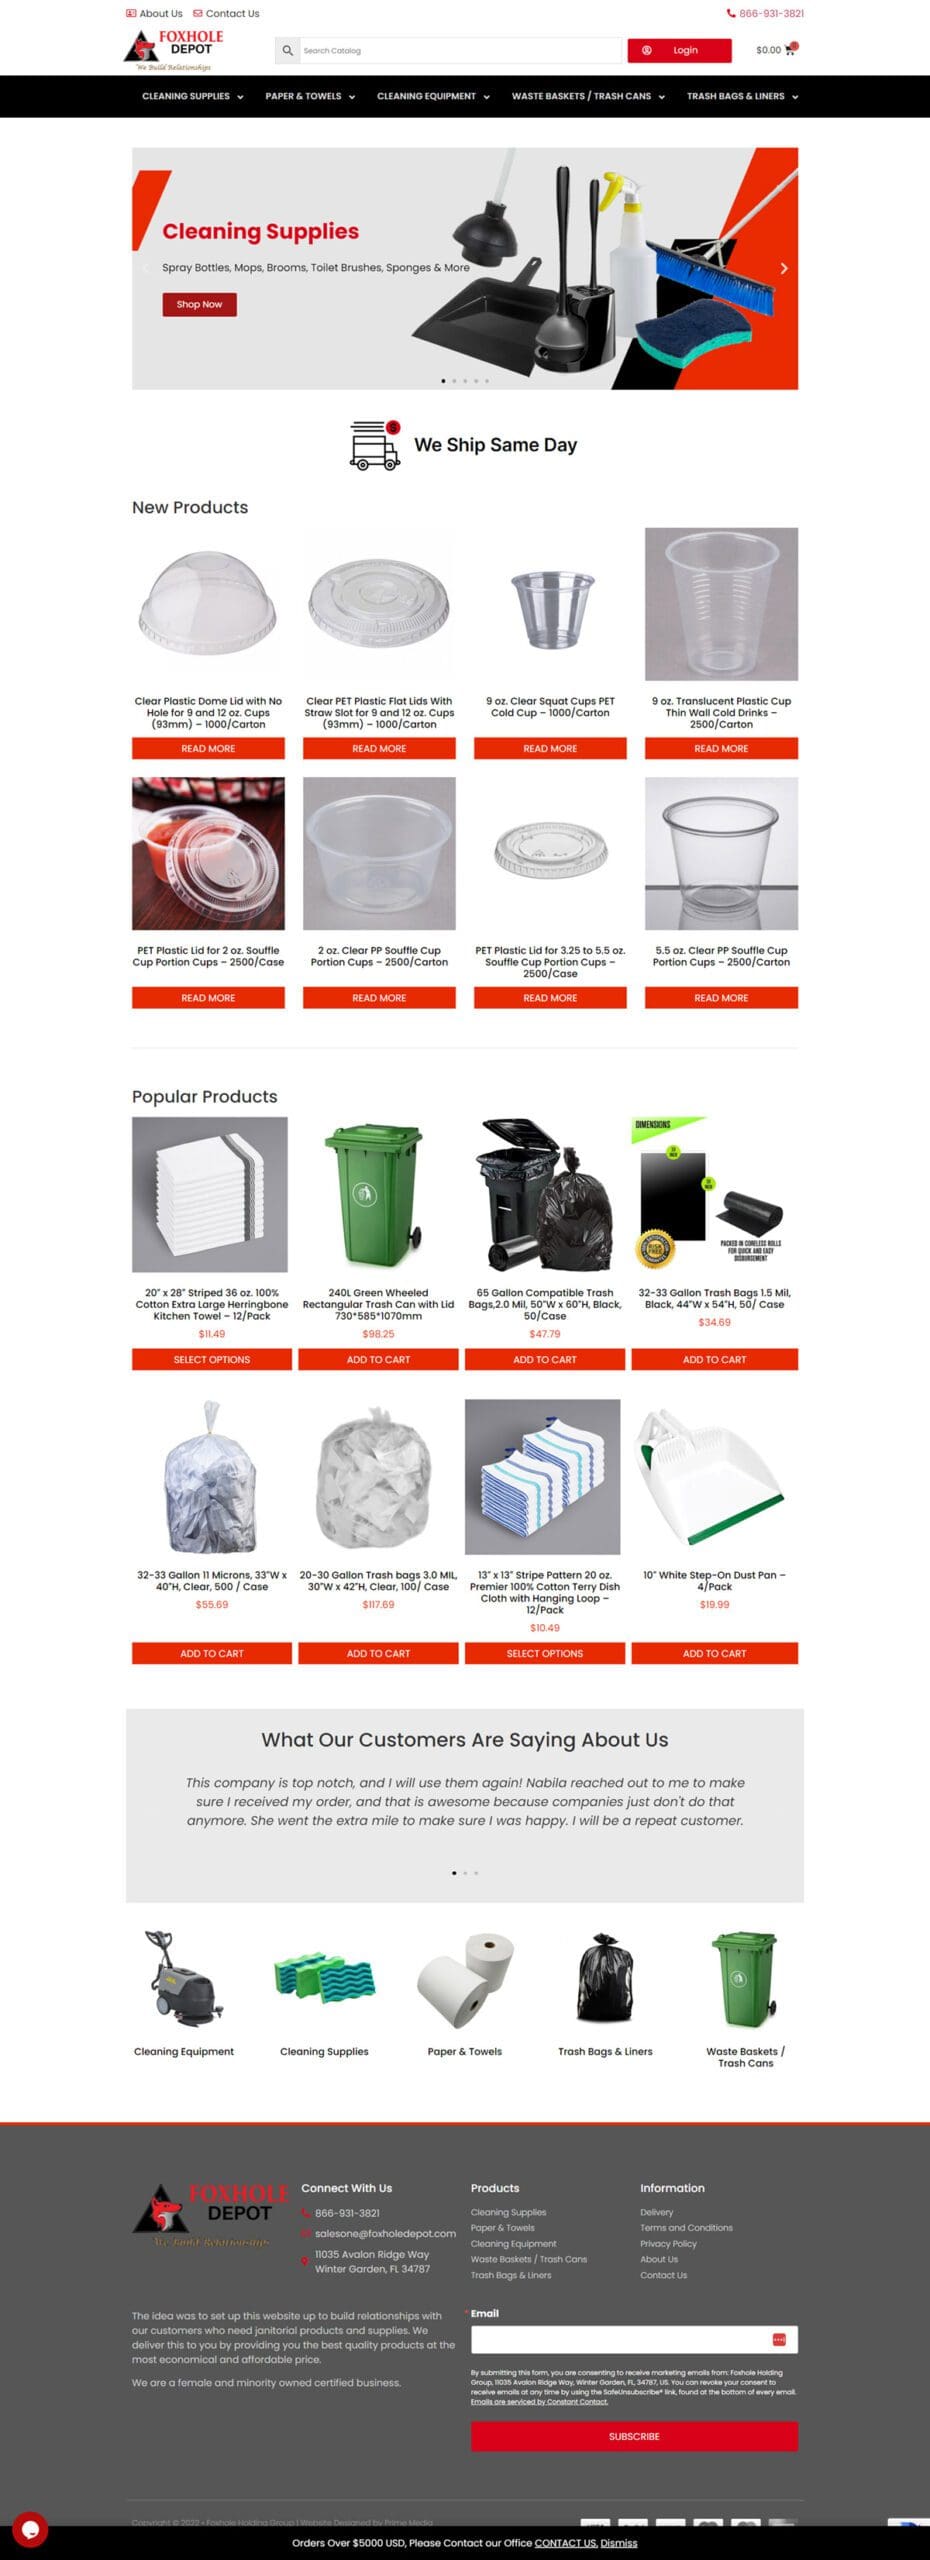 Cleaning Supply eCommerce Website